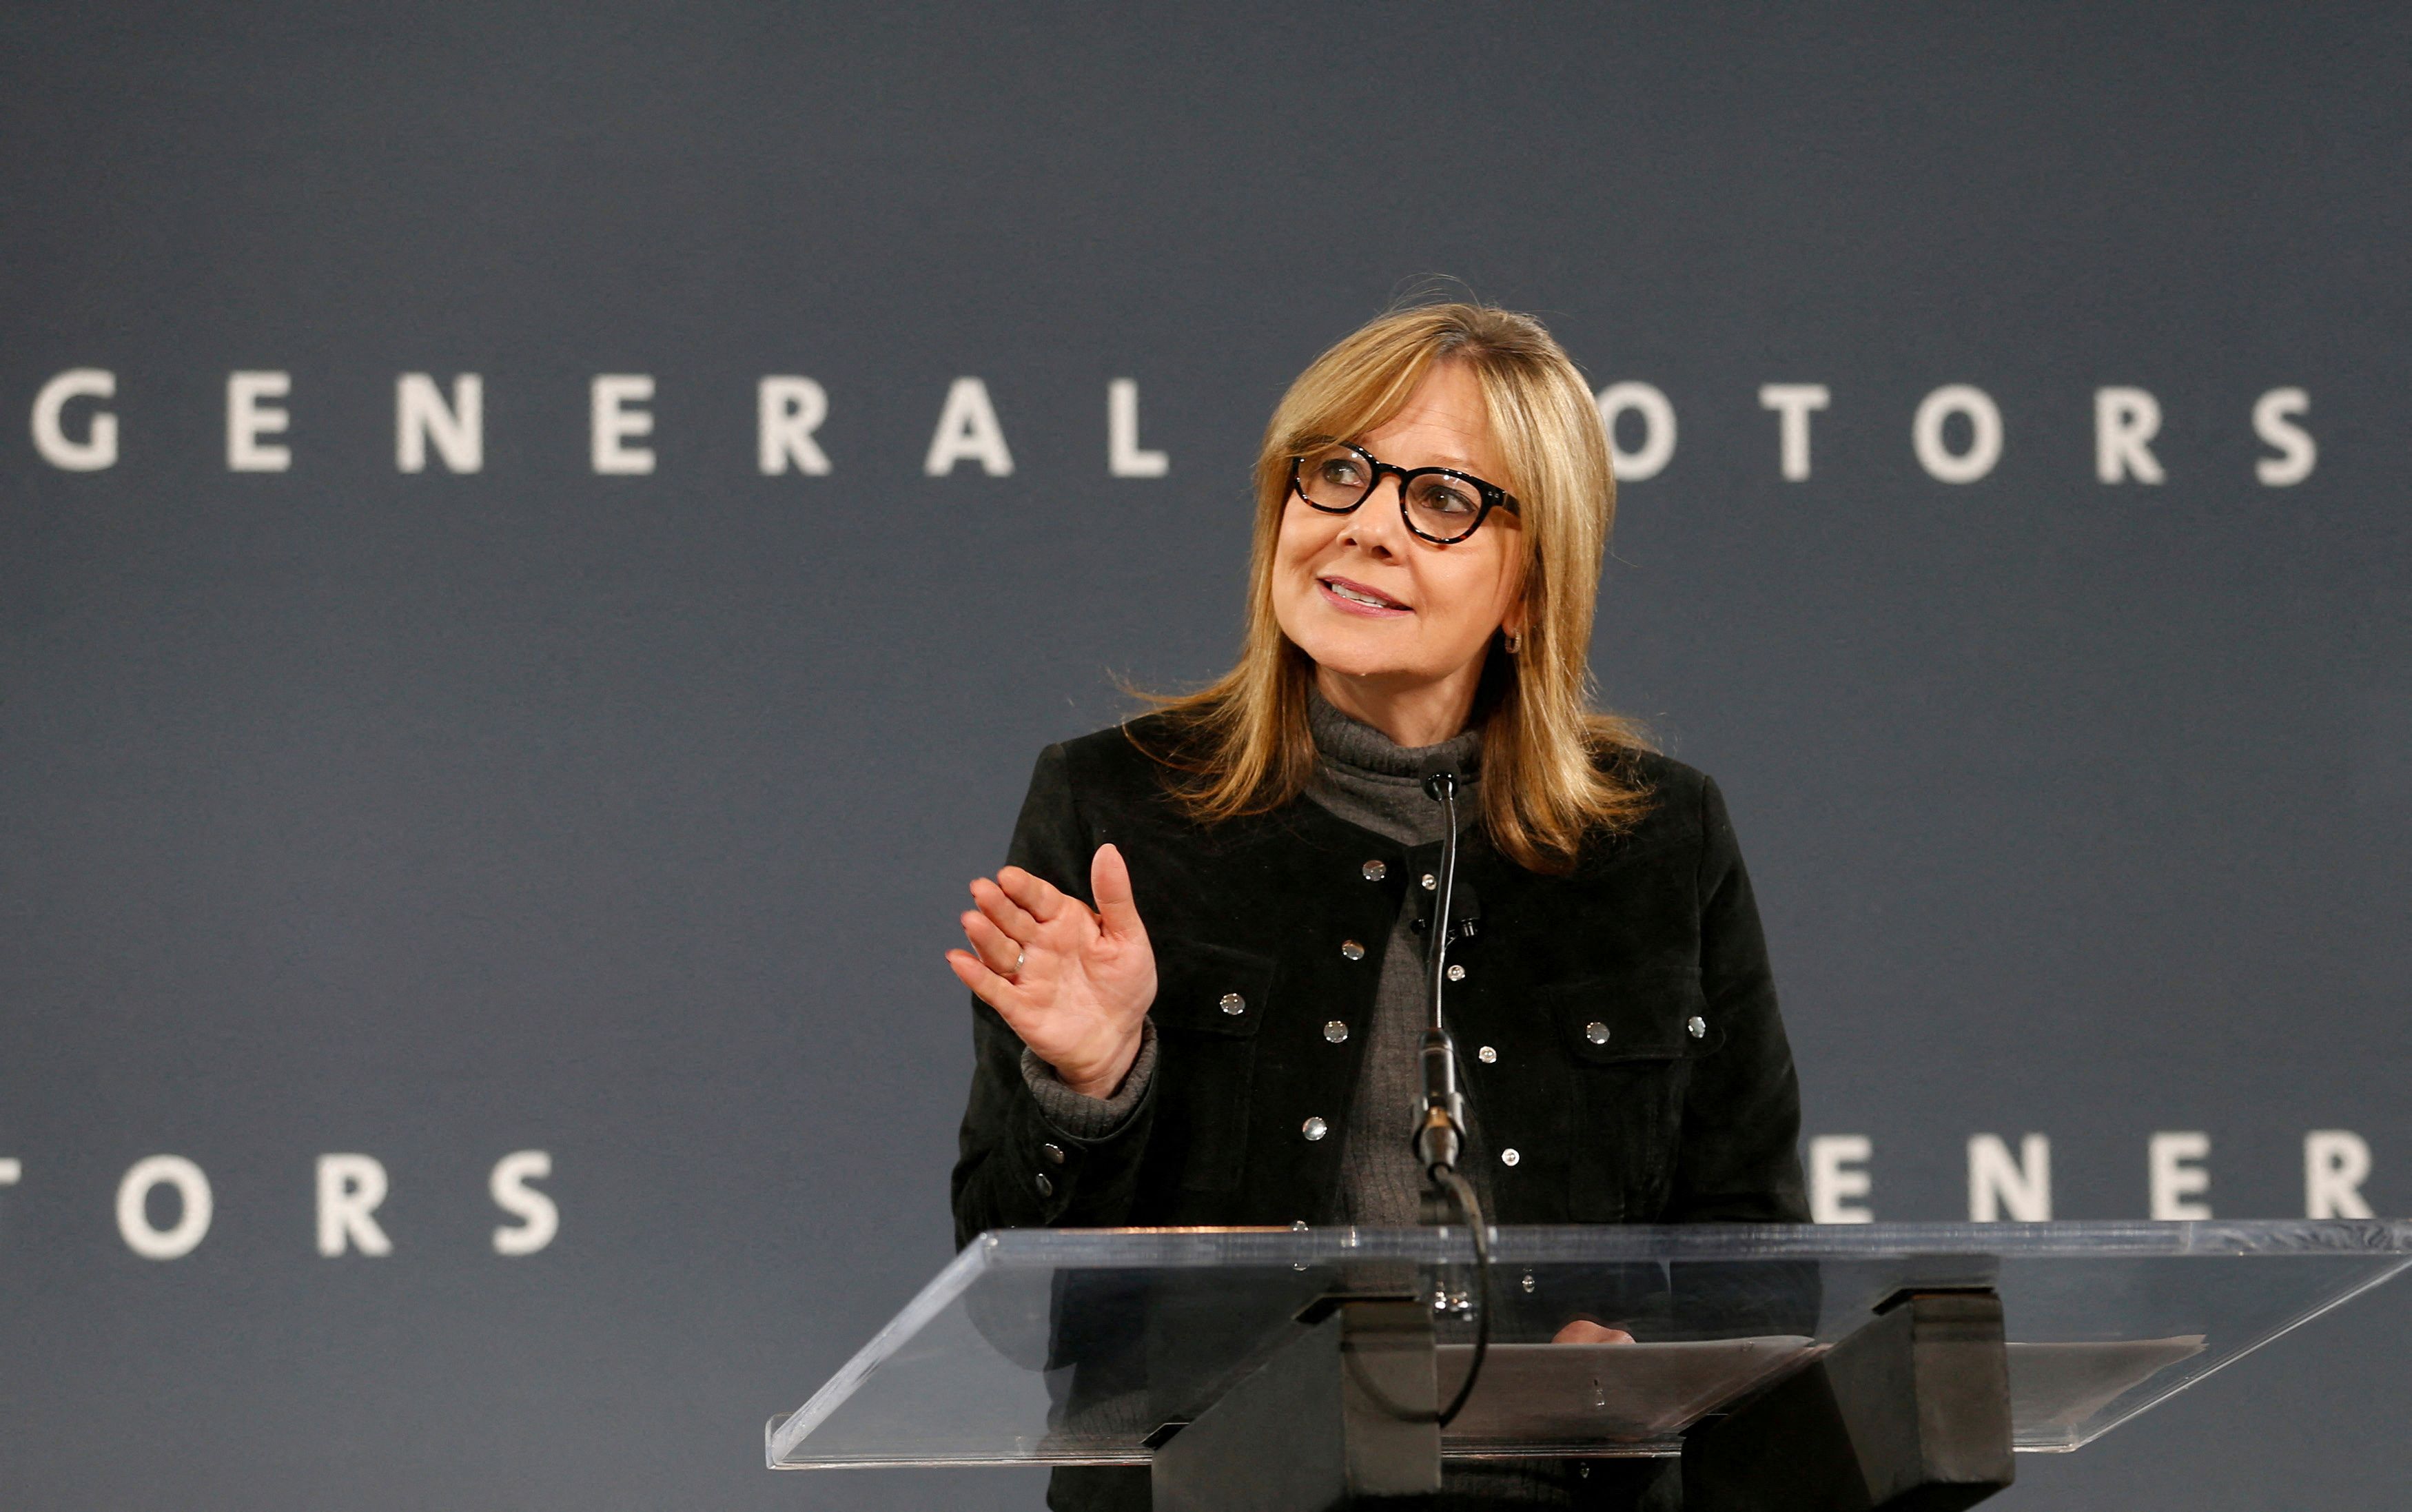 General Motors Chairman and CEO Mary Barra announces that Chevrolet will begin testing a fleet of Bolt autonomous vehicles in Michigan during a news conference in Detroit